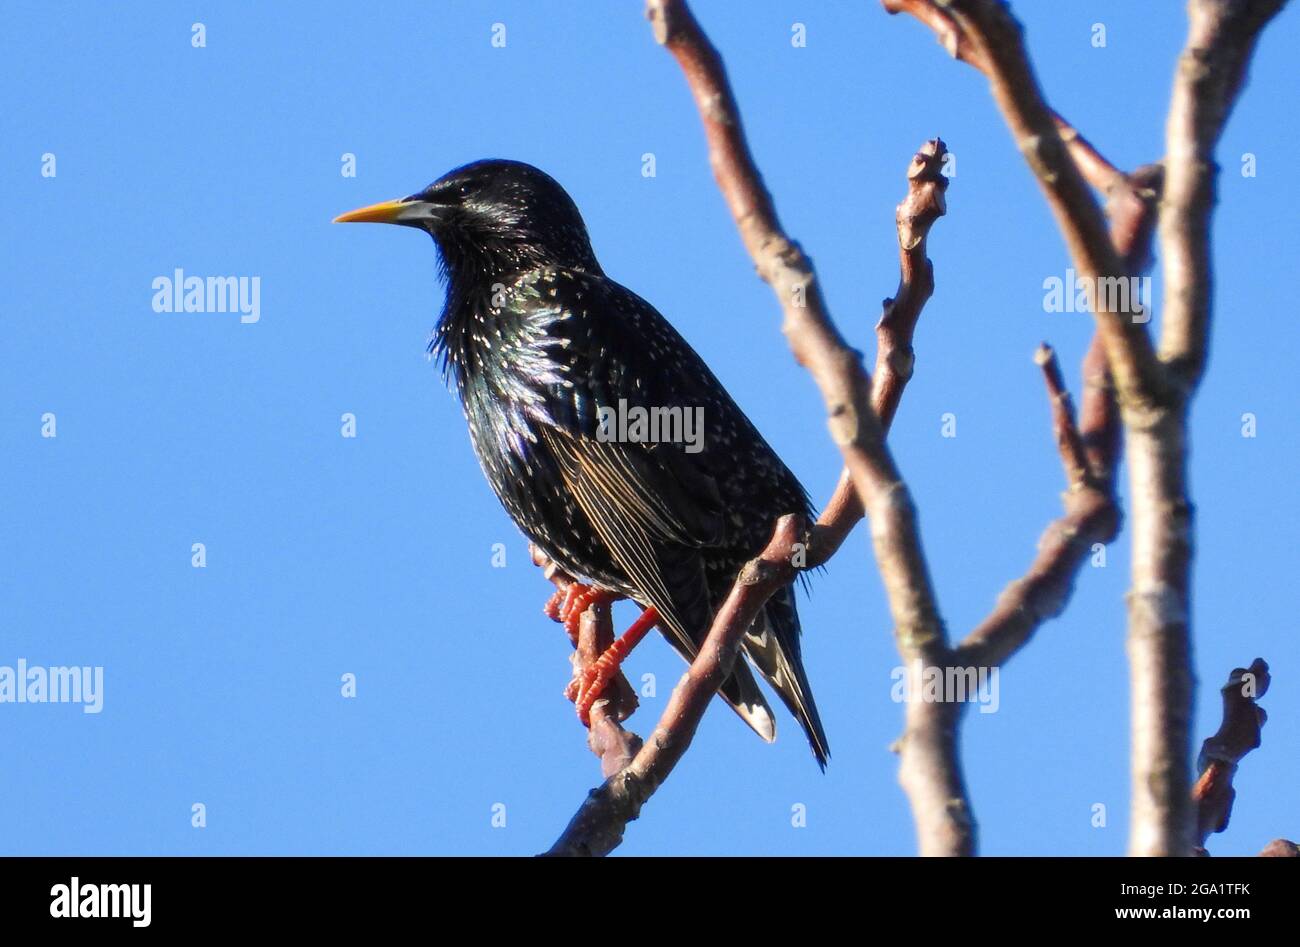 A common starling isolated perched at the top of a dry tree Stock Photo